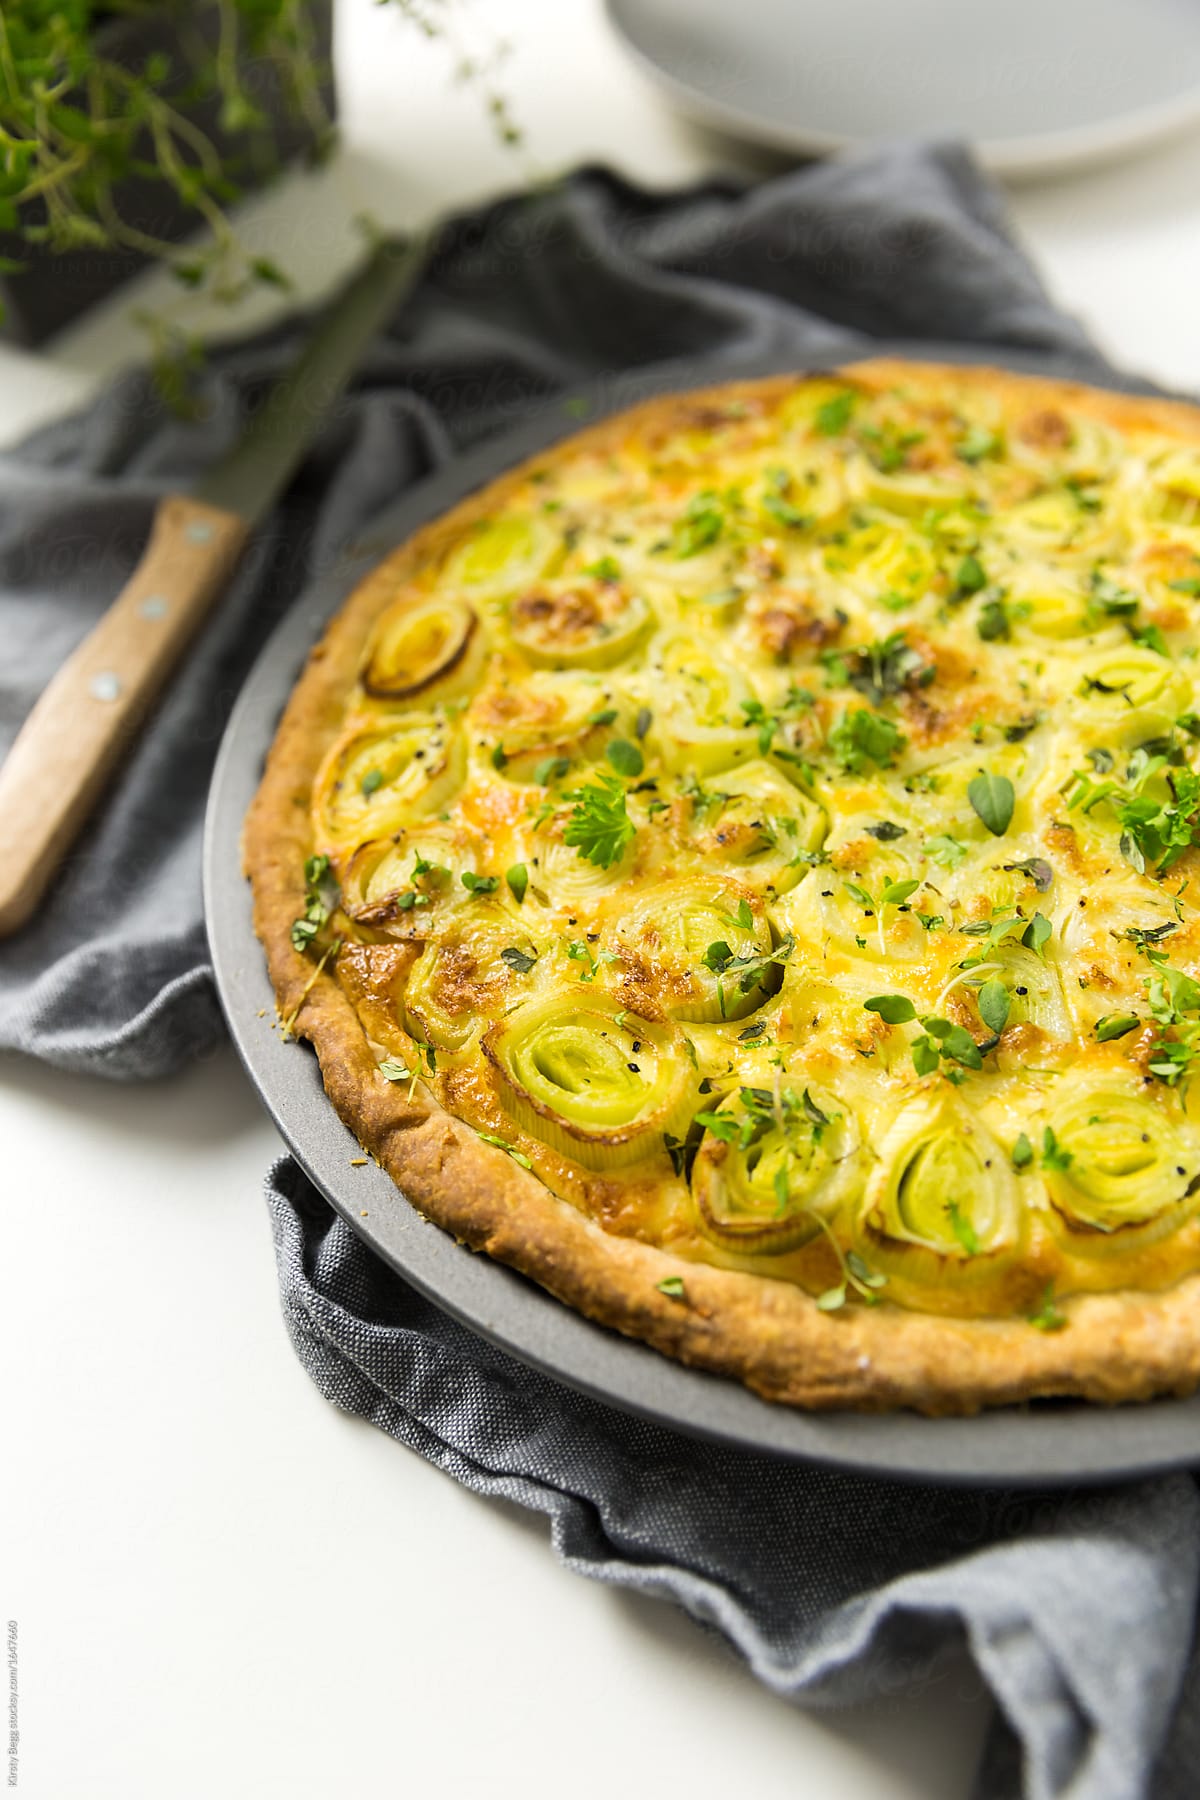 CHeese and leek tart on table